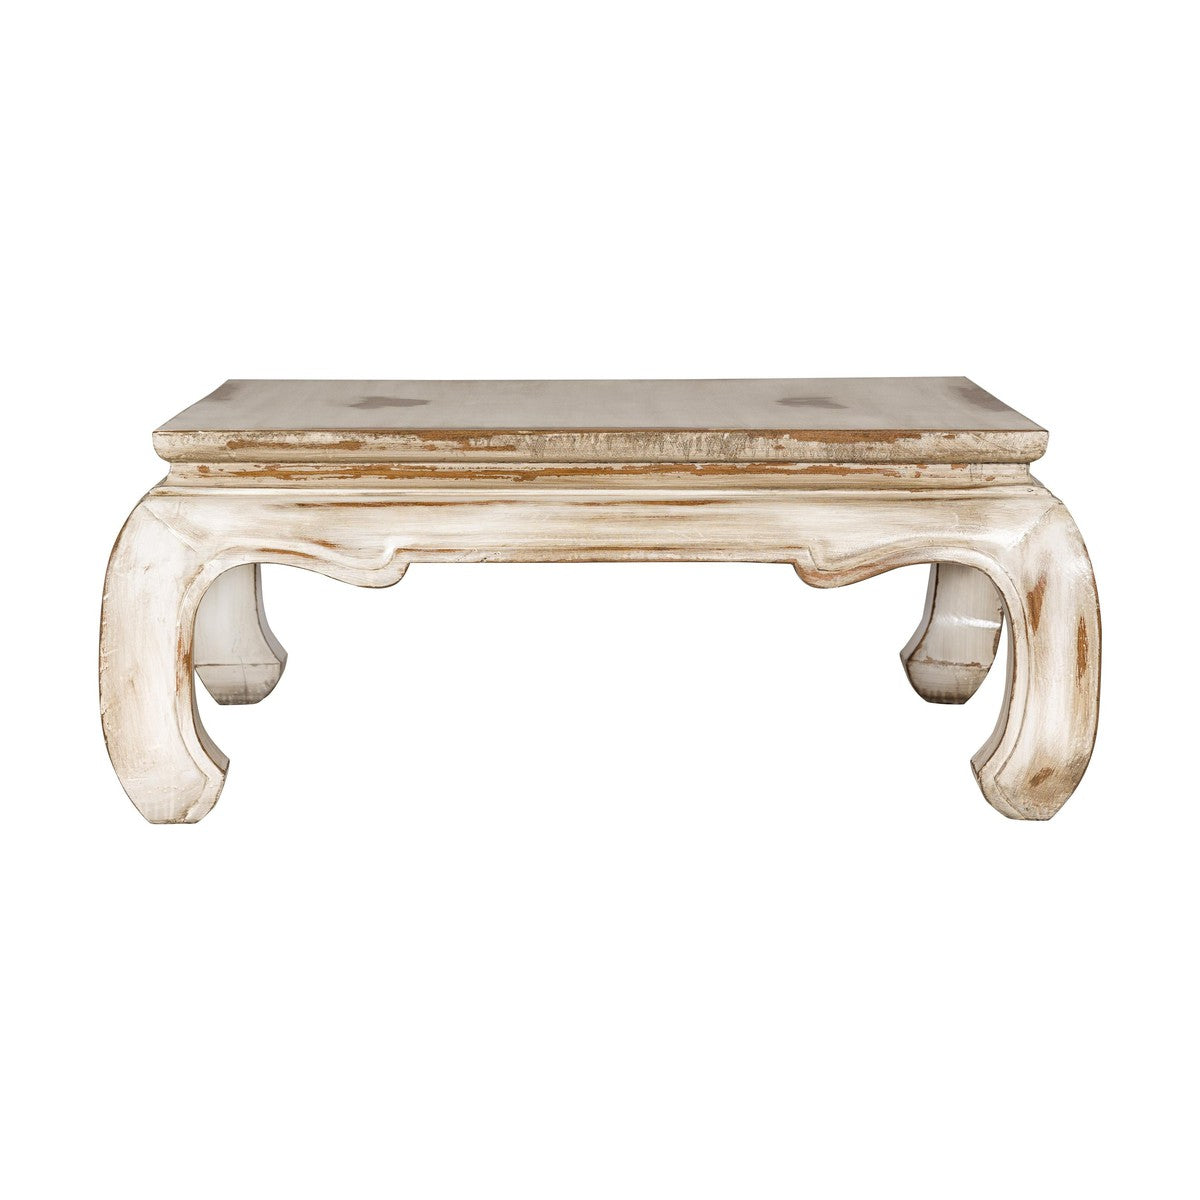 Distressed White Coffee Table with Chow Legs and Square Top, Vintage-YN7957-13. Asian & Chinese Furniture, Art, Antiques, Vintage Home Décor for sale at FEA Home